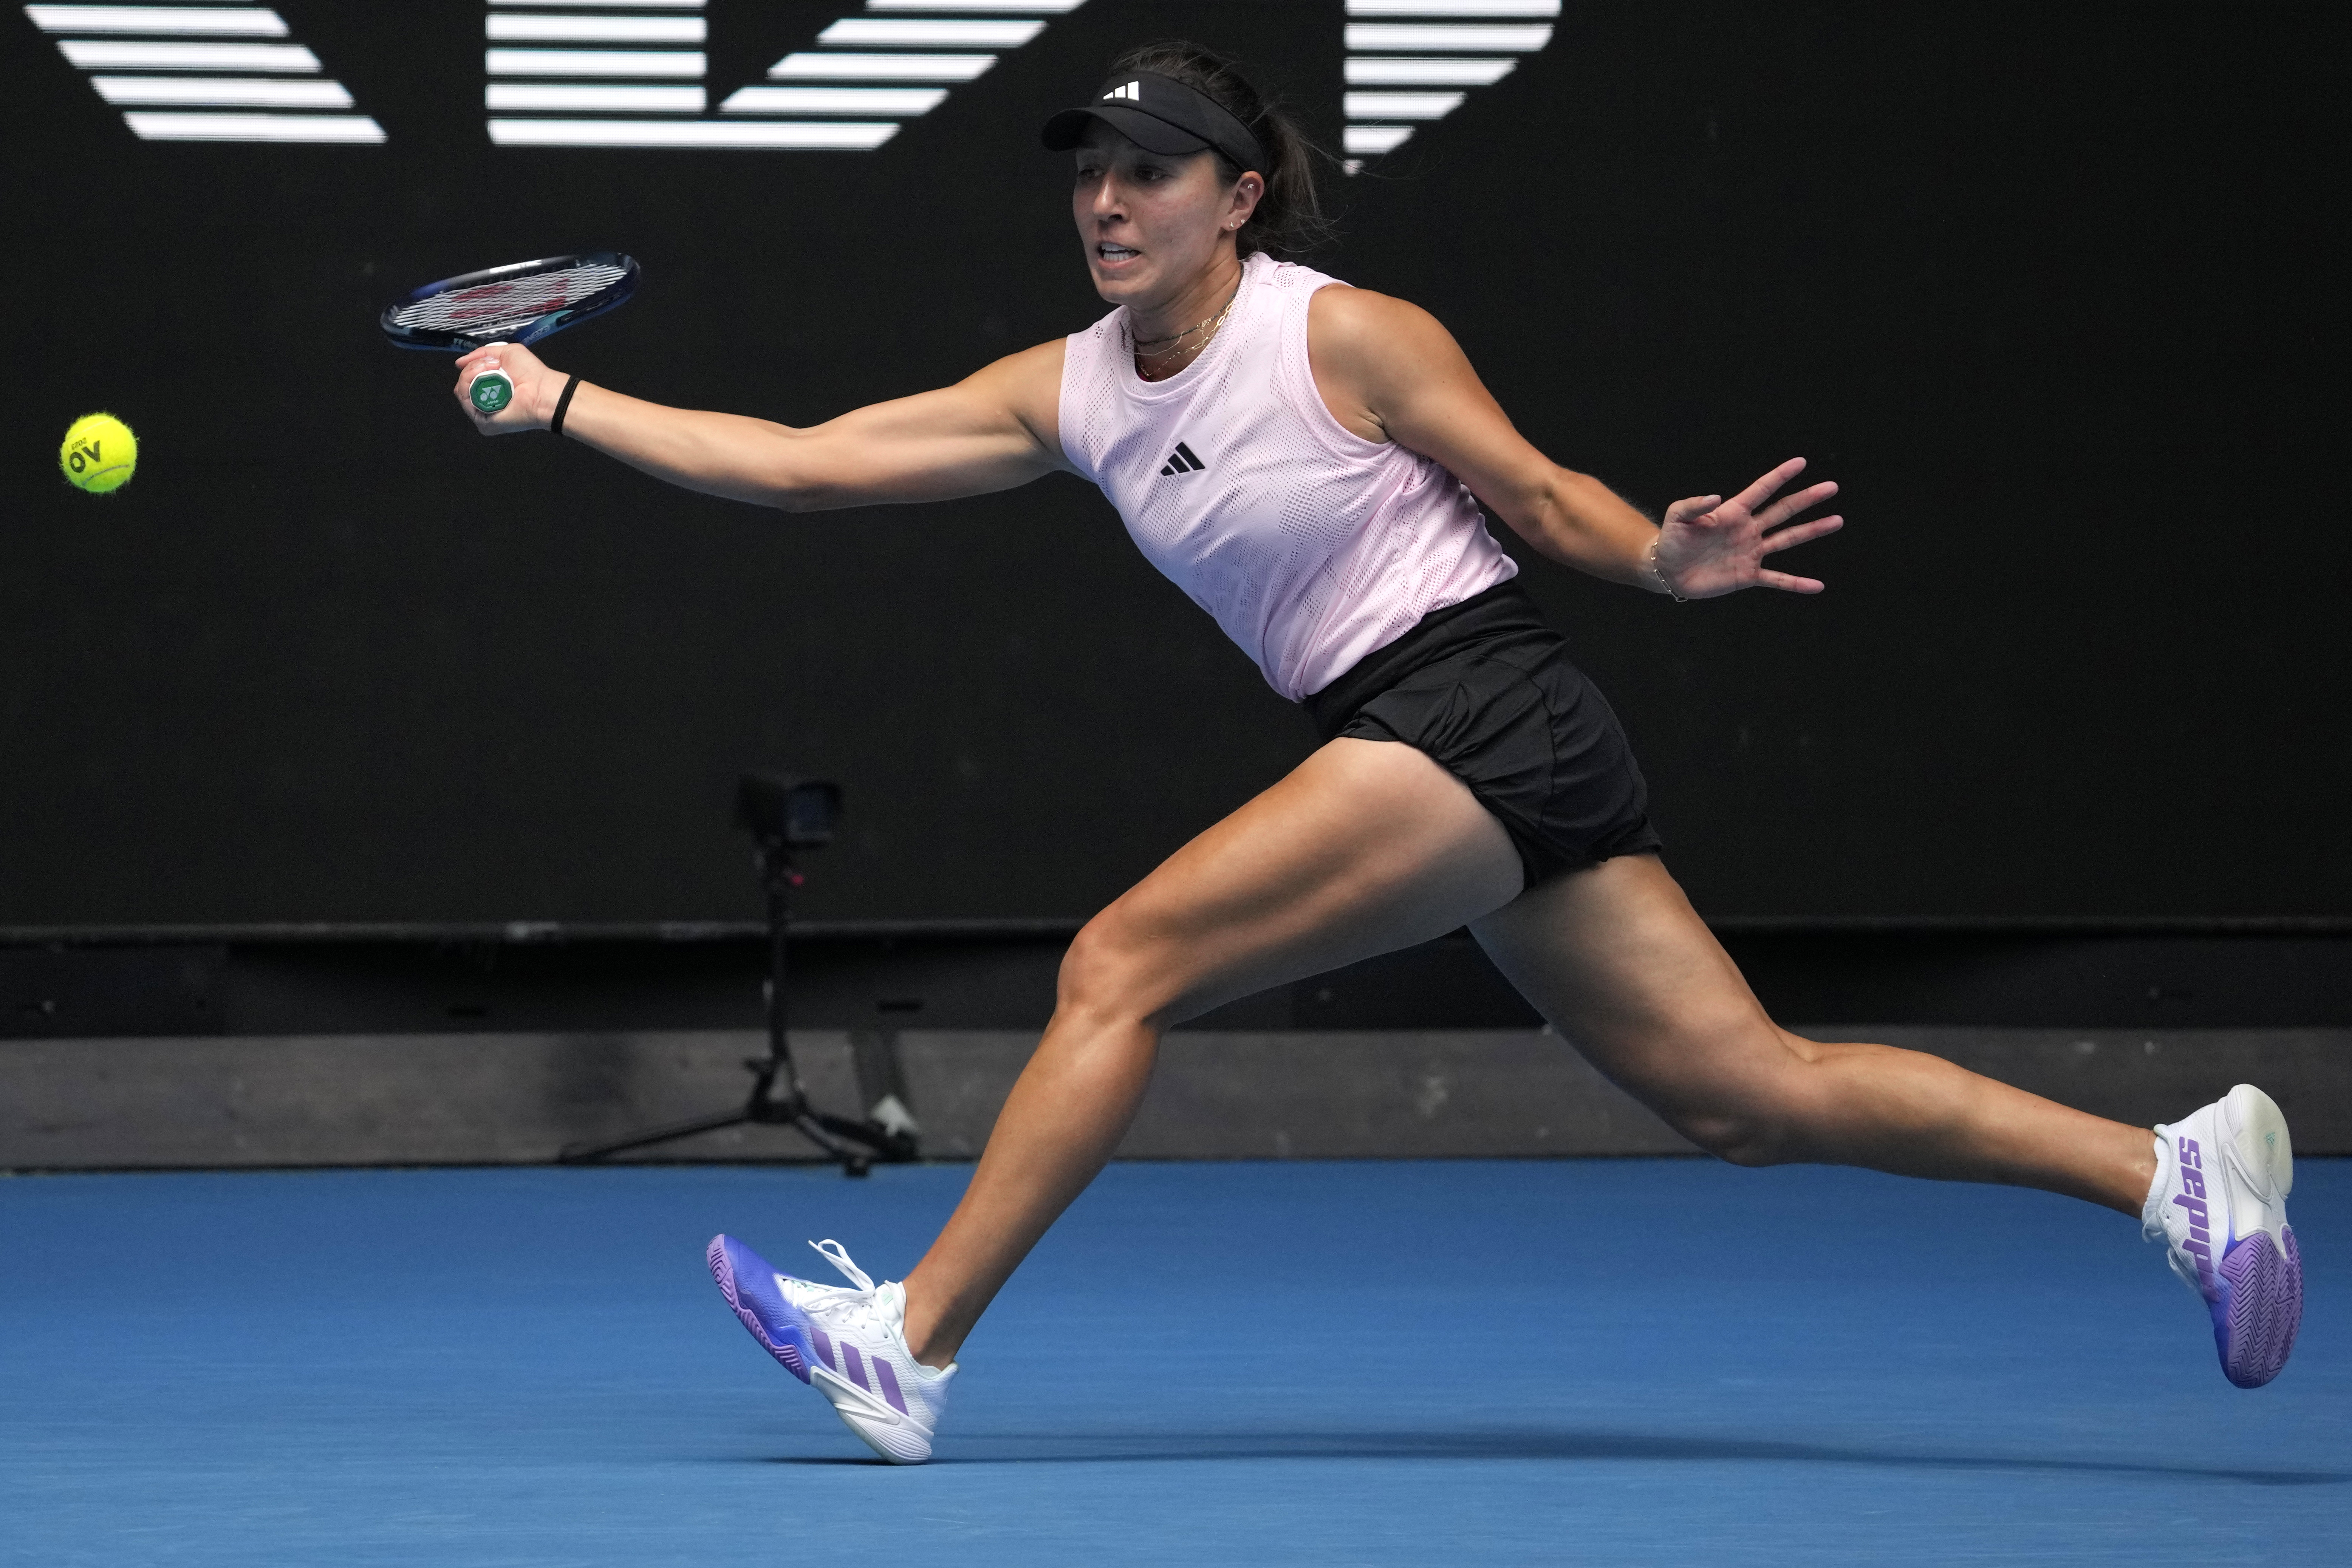 How to watch Australian Open (1/15/23) Details, TV, time, FREE live stream for 1st-round coverage